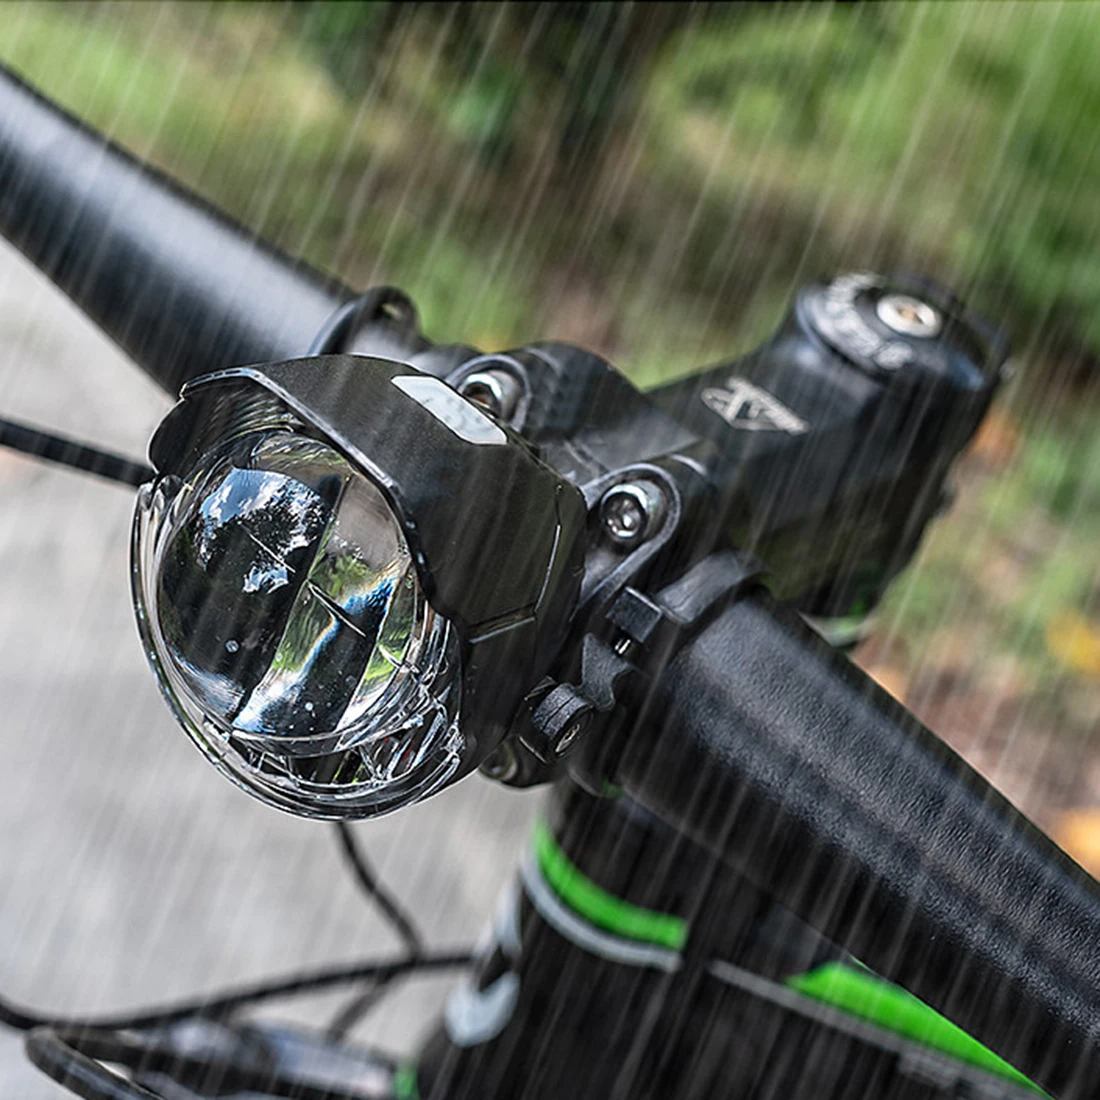 

Bicycle LampLeadbike LD28 USB Rechargeable Bike Light T6 LED Bicycle Headlight 750LMs IP4 Waterproof 3 Modes Front Light